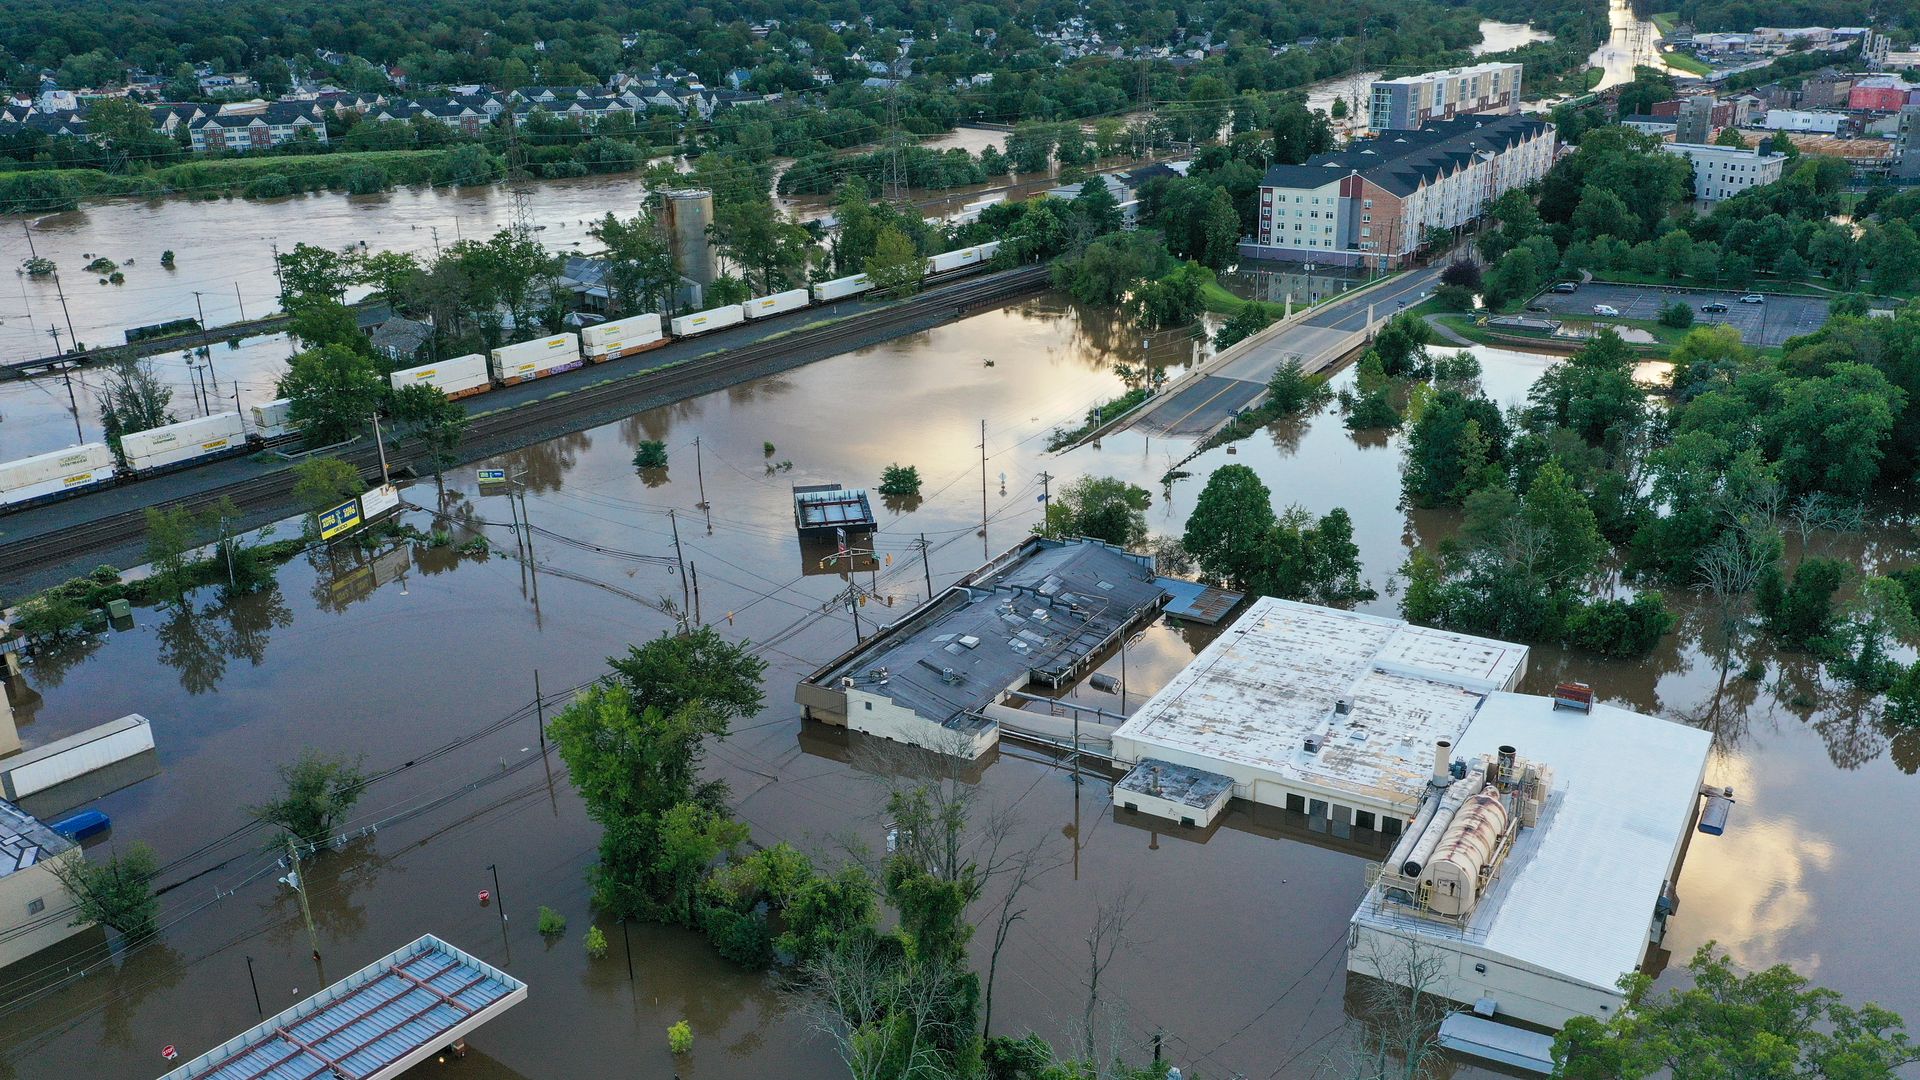 Flooded town in New Jersey seen after Hurricane Ida in September 2021.